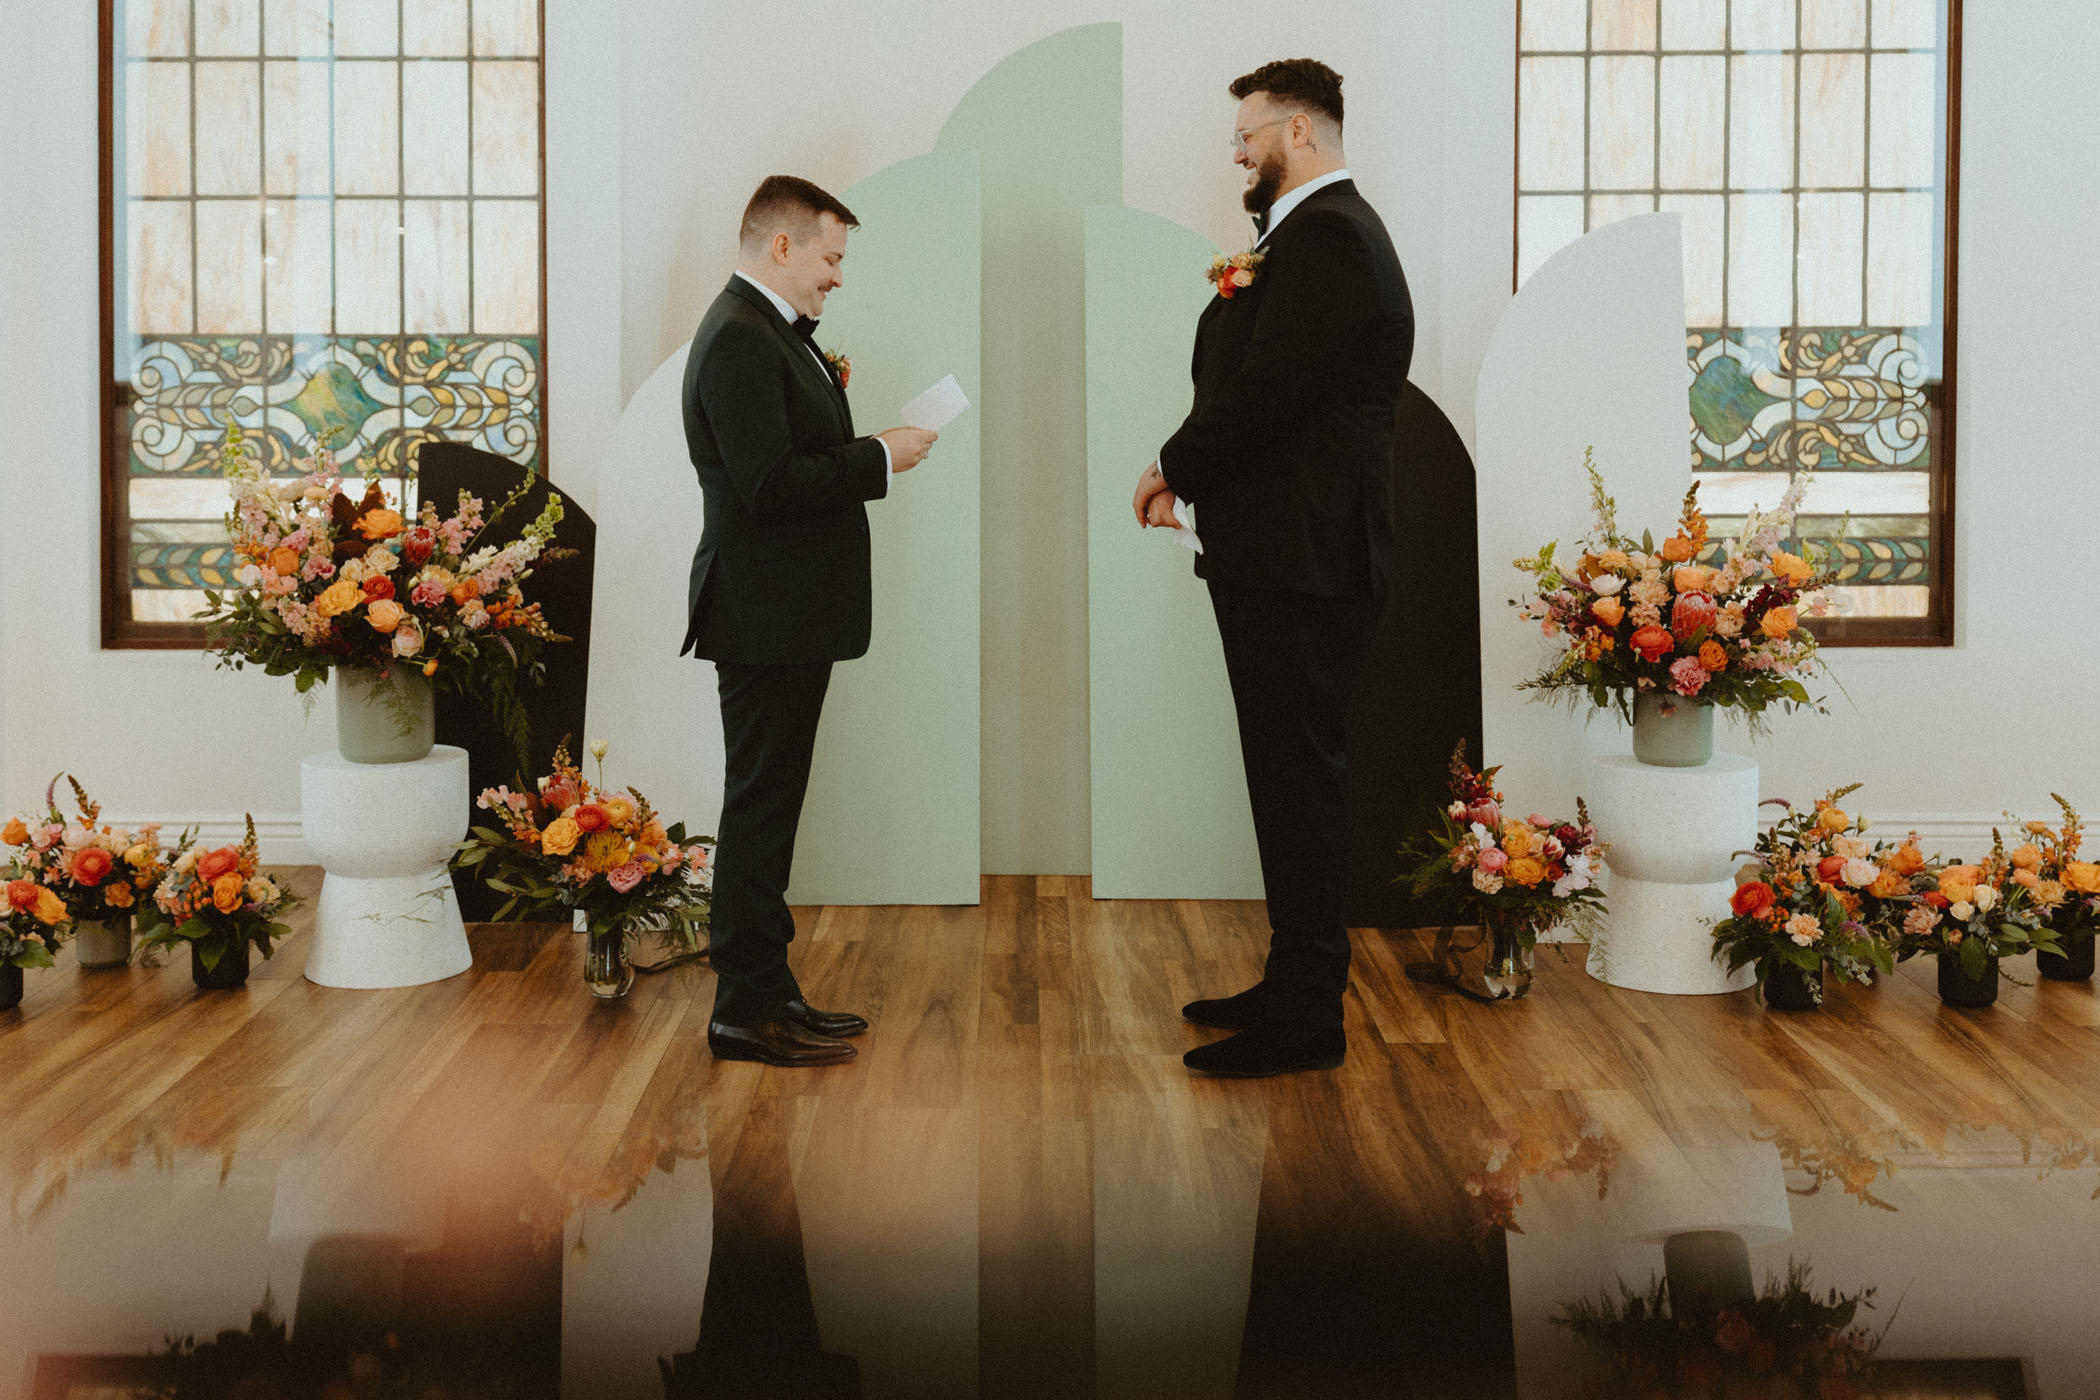 Grooms recreate first date for wedding